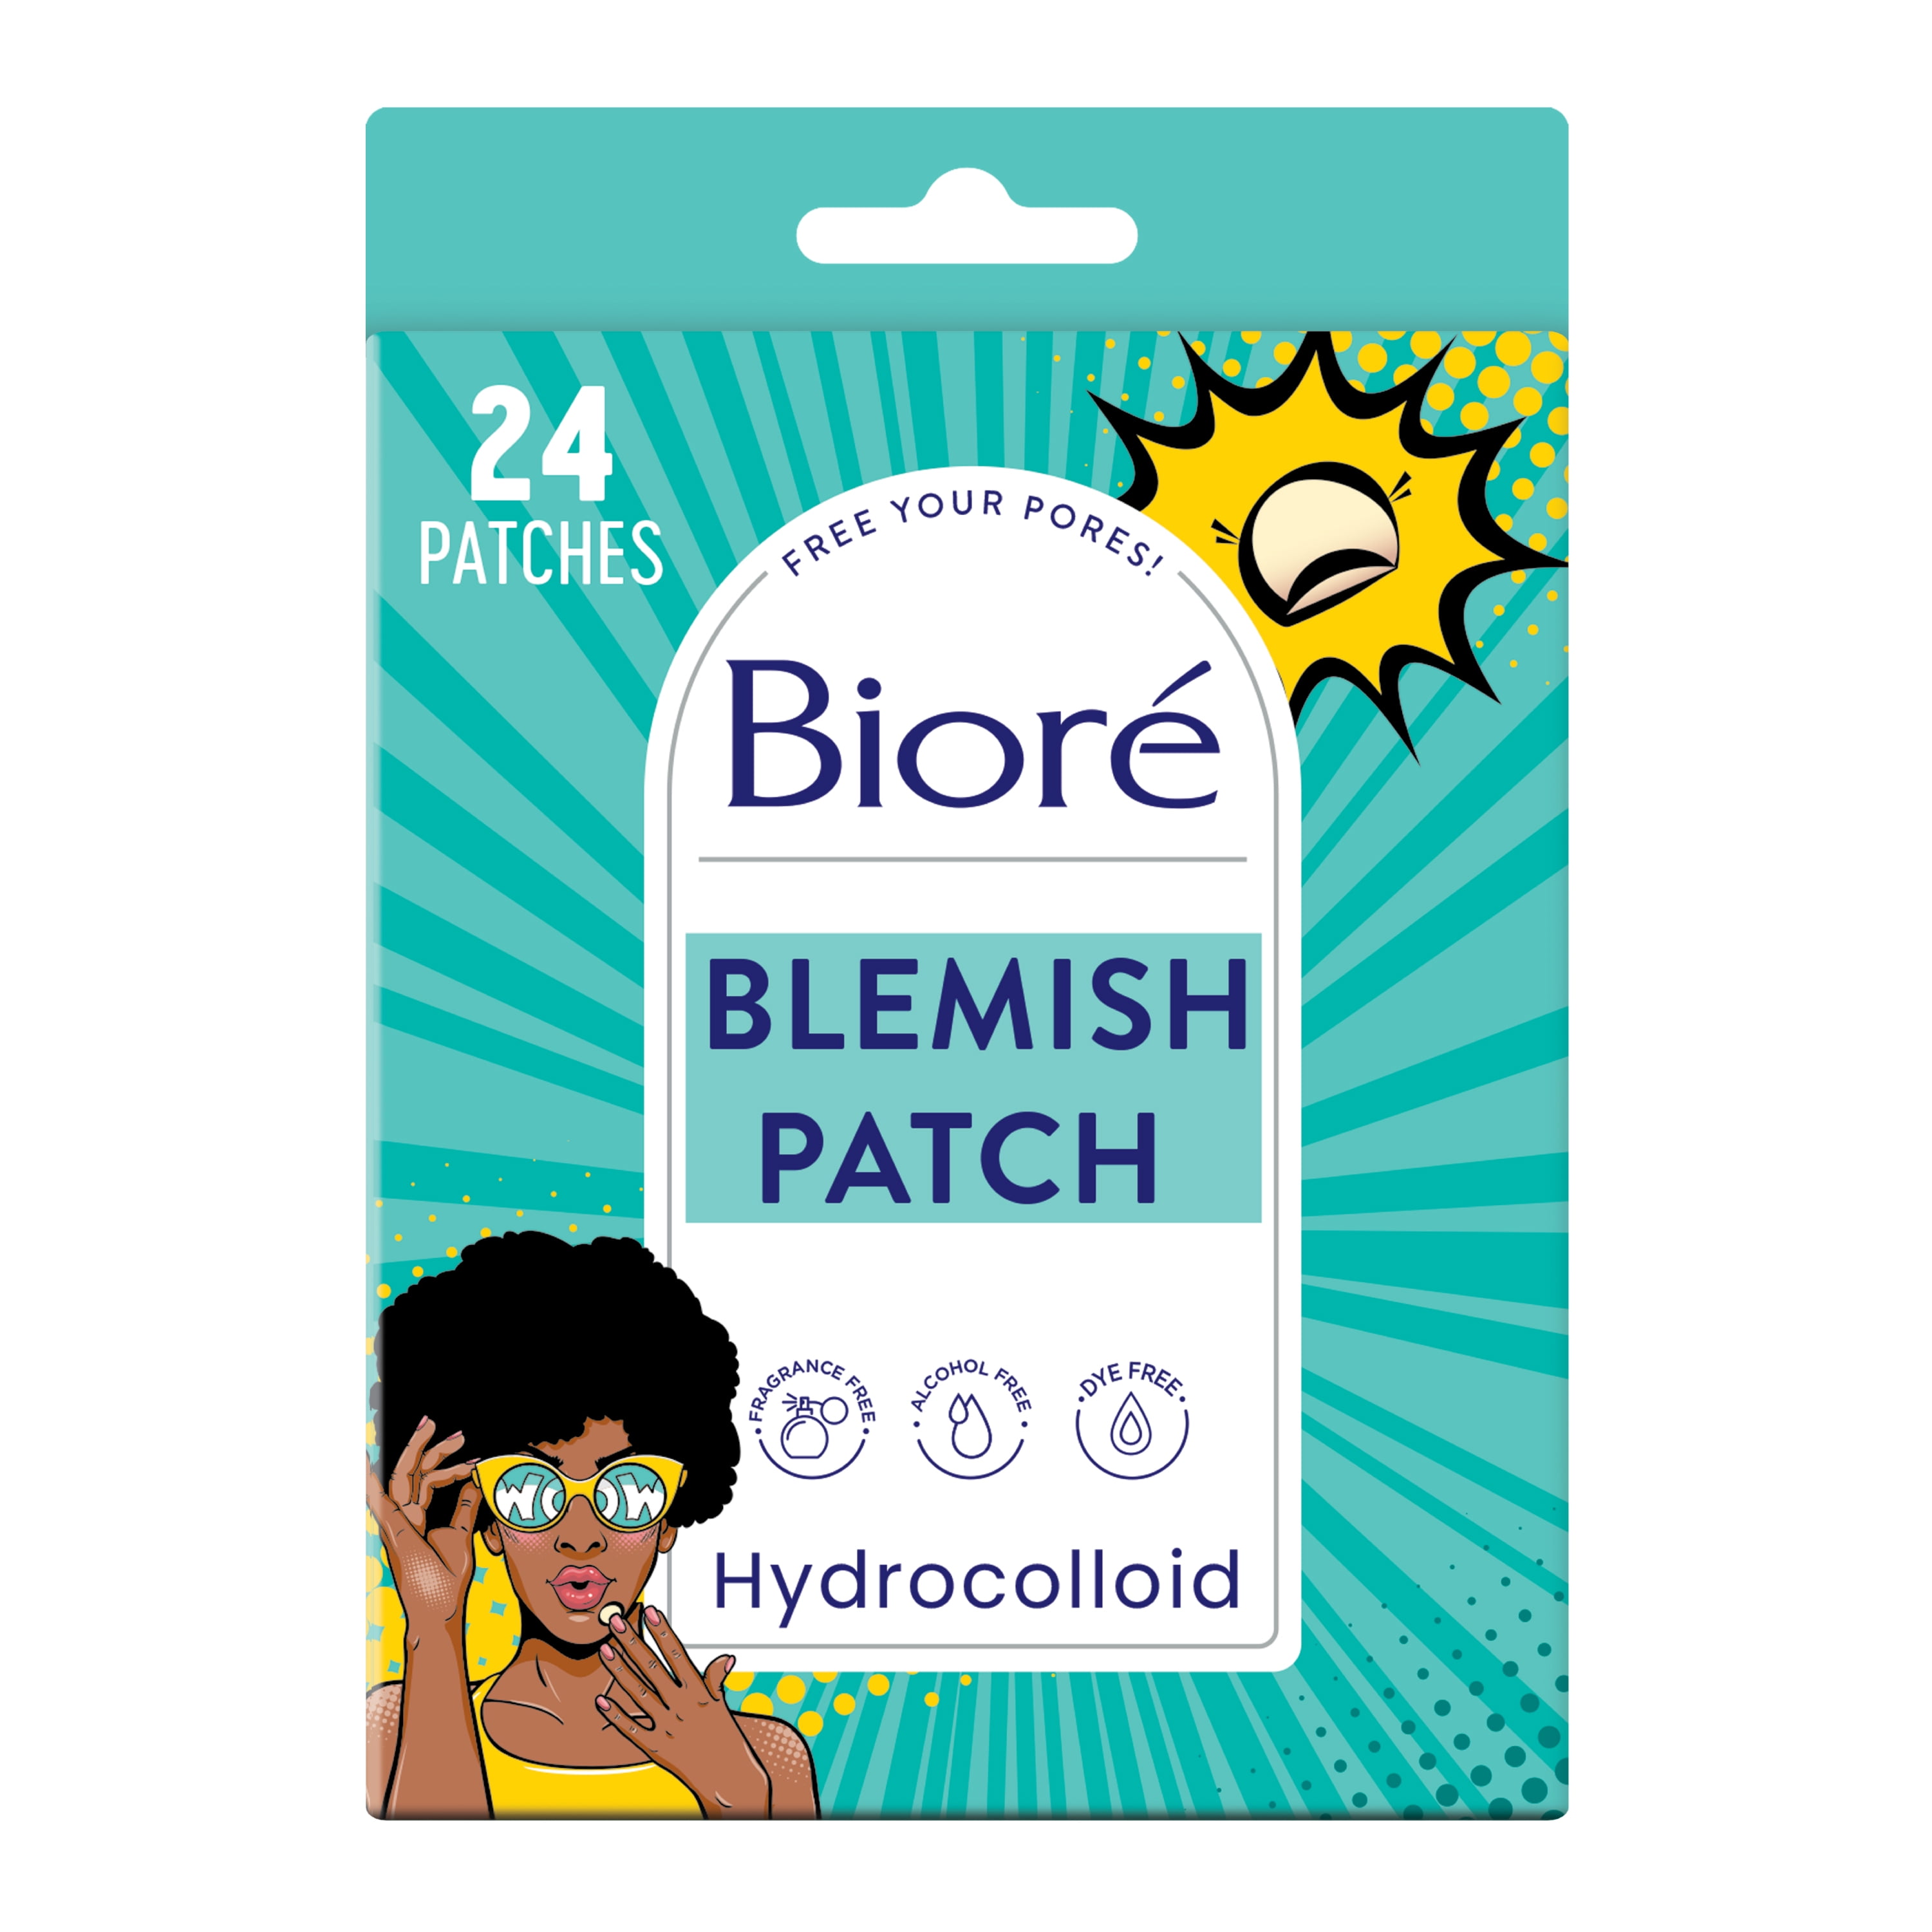 Biore Pimple Patch, Cover & Conquer Blemish Patch, Medical Grade Ultra-Thin  Hydrocolloid Pimple Patch for Covering Zits and Blemishes, HSA/FSA 